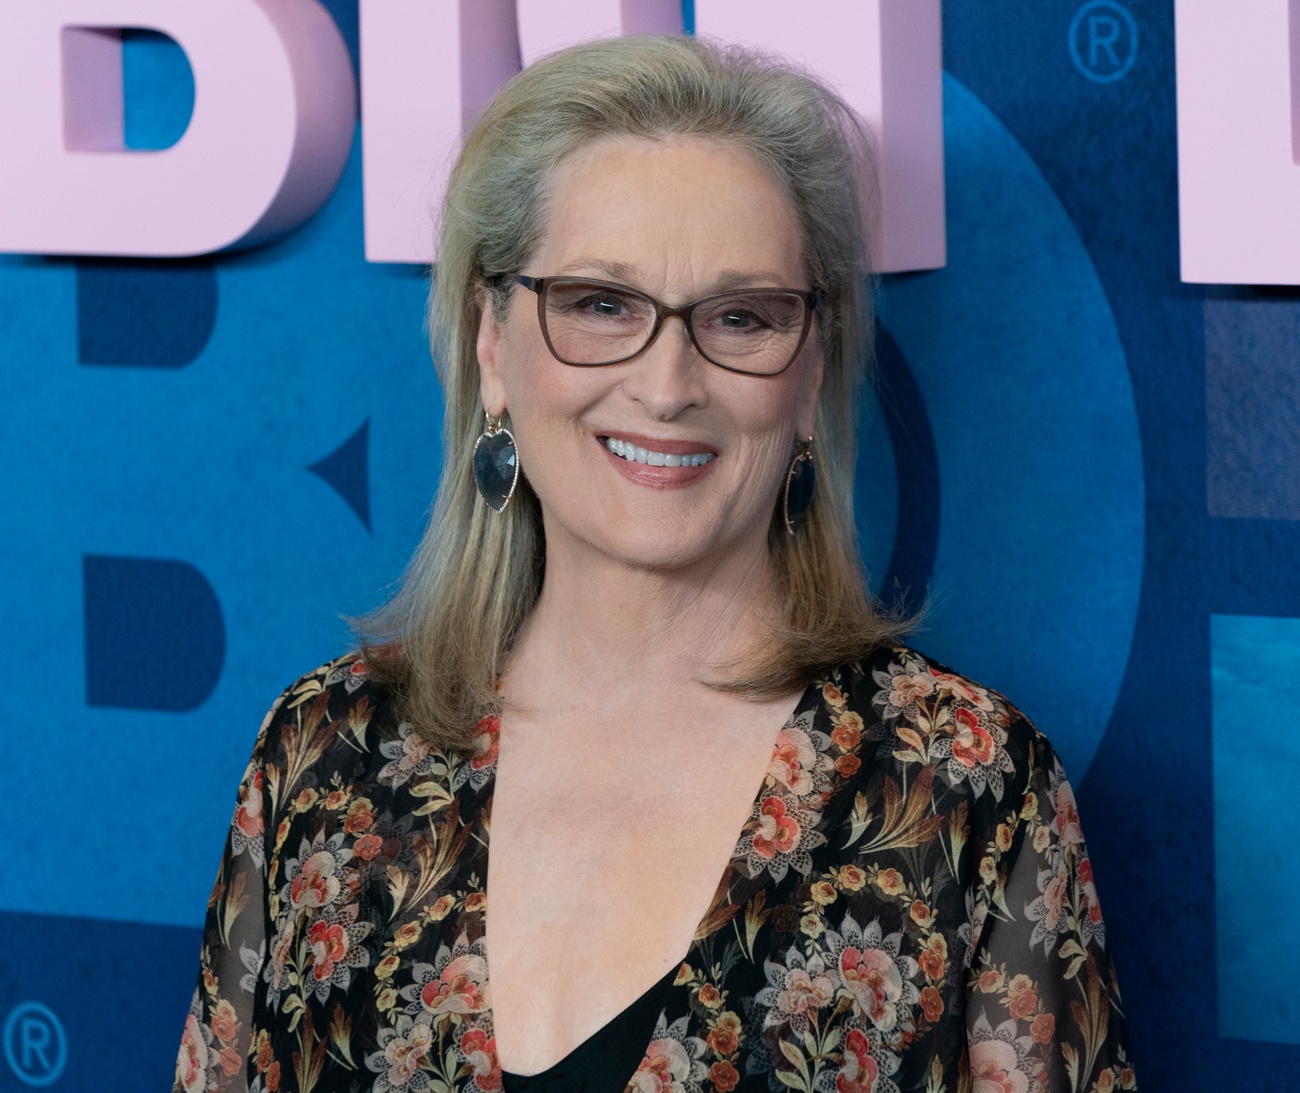 Streep began acting at the age of 12